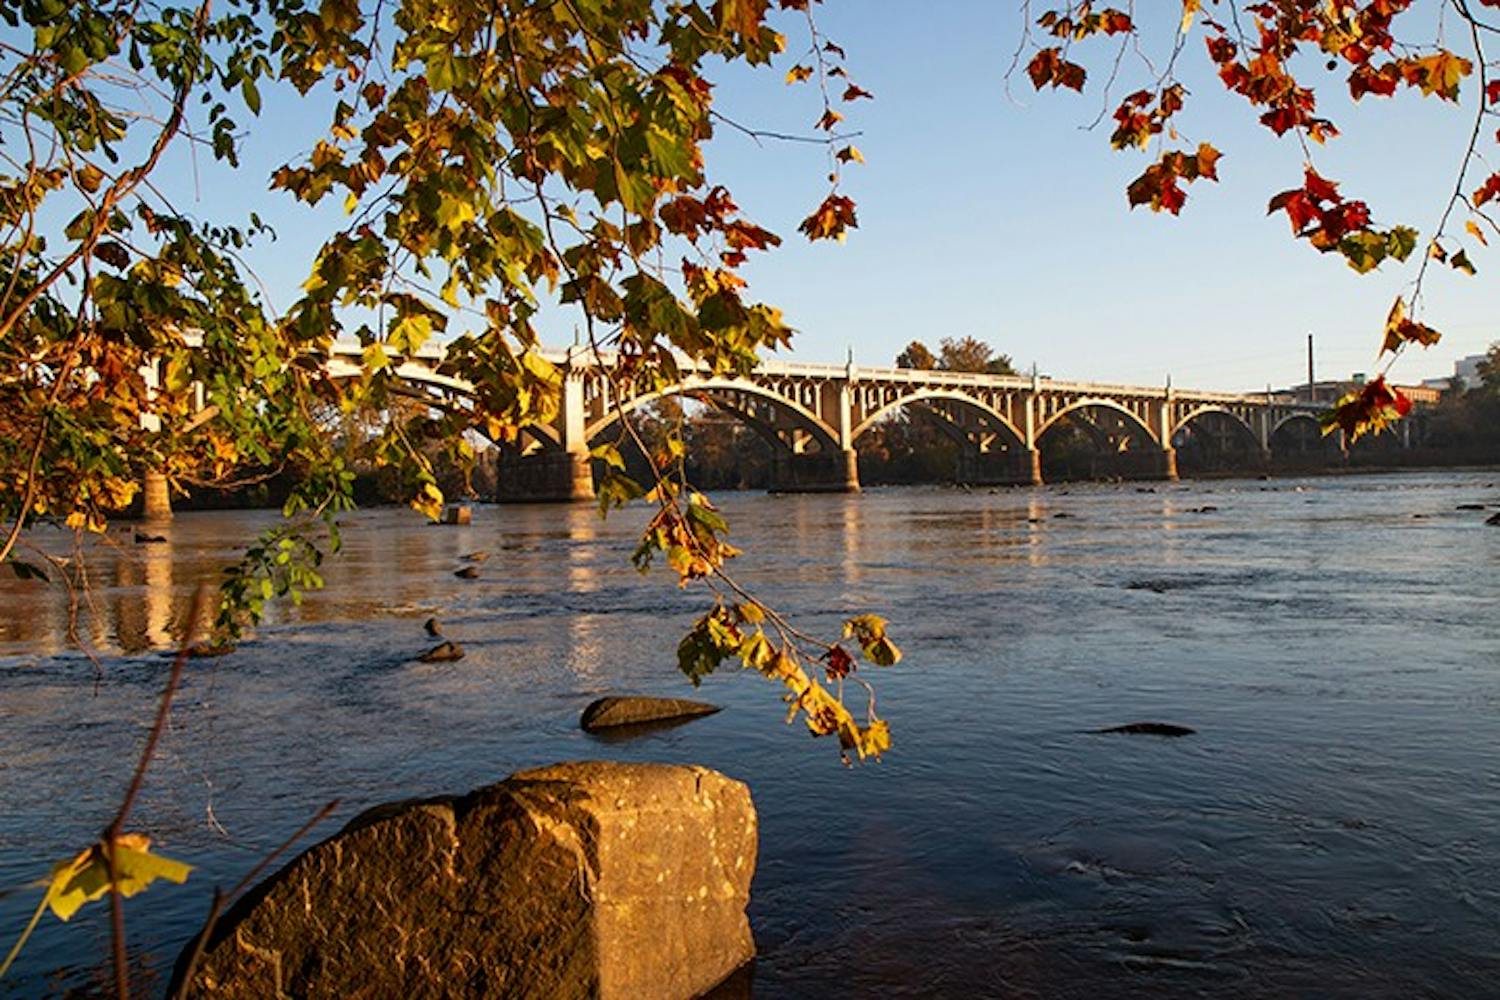 FILE—The sun rises over the Congaree River and the Gervais Street Bridge. The Congaree River flows through downtown Columbia at the junction of the Saluda River and the Broad River.&nbsp;